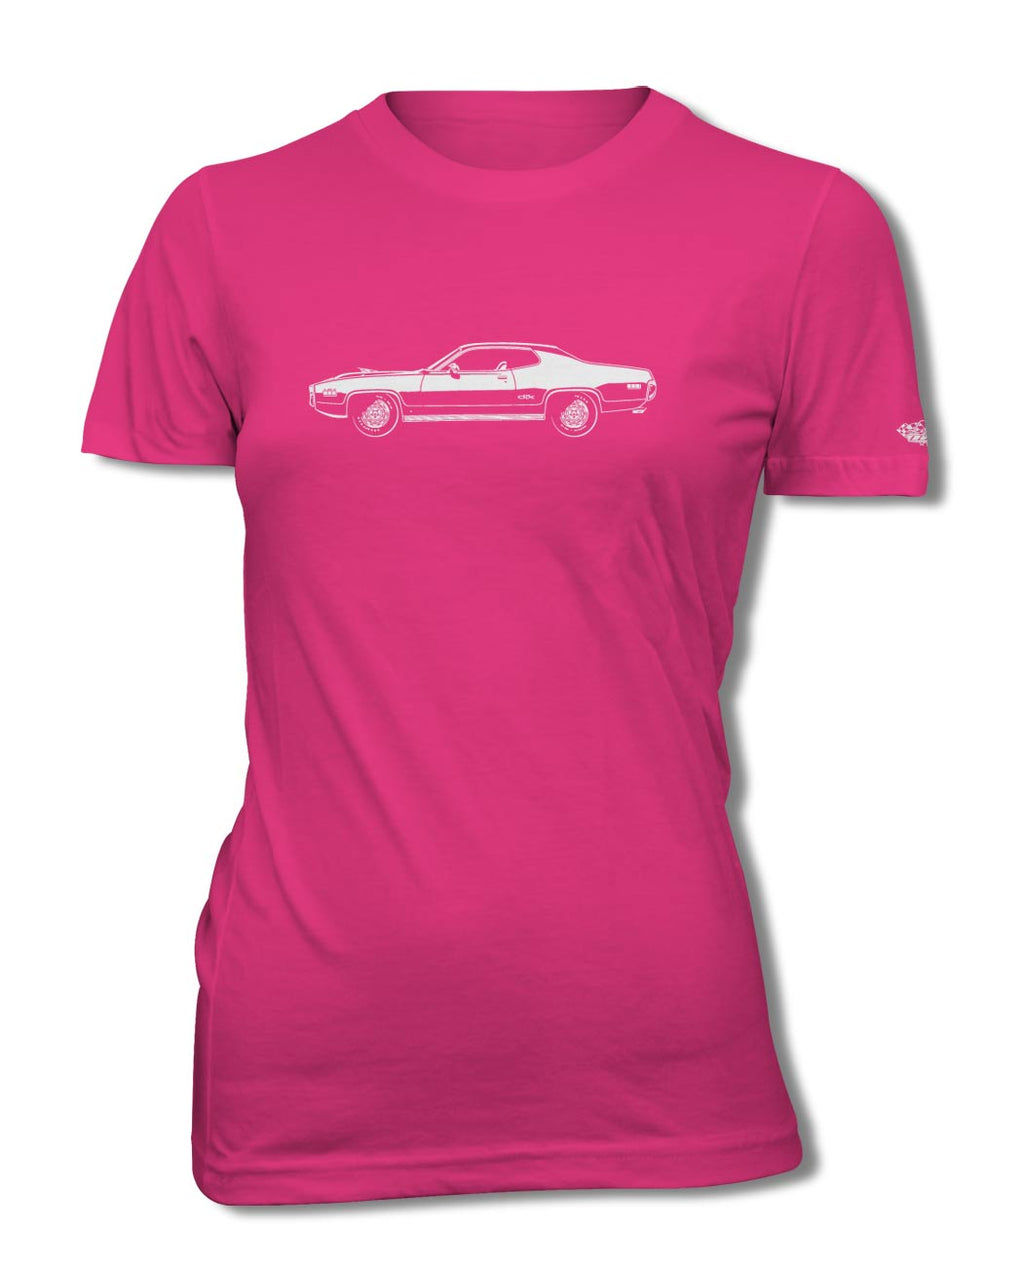 1971 Plymouth GTX 440-6 Coupe T-Shirt - Women - Side View